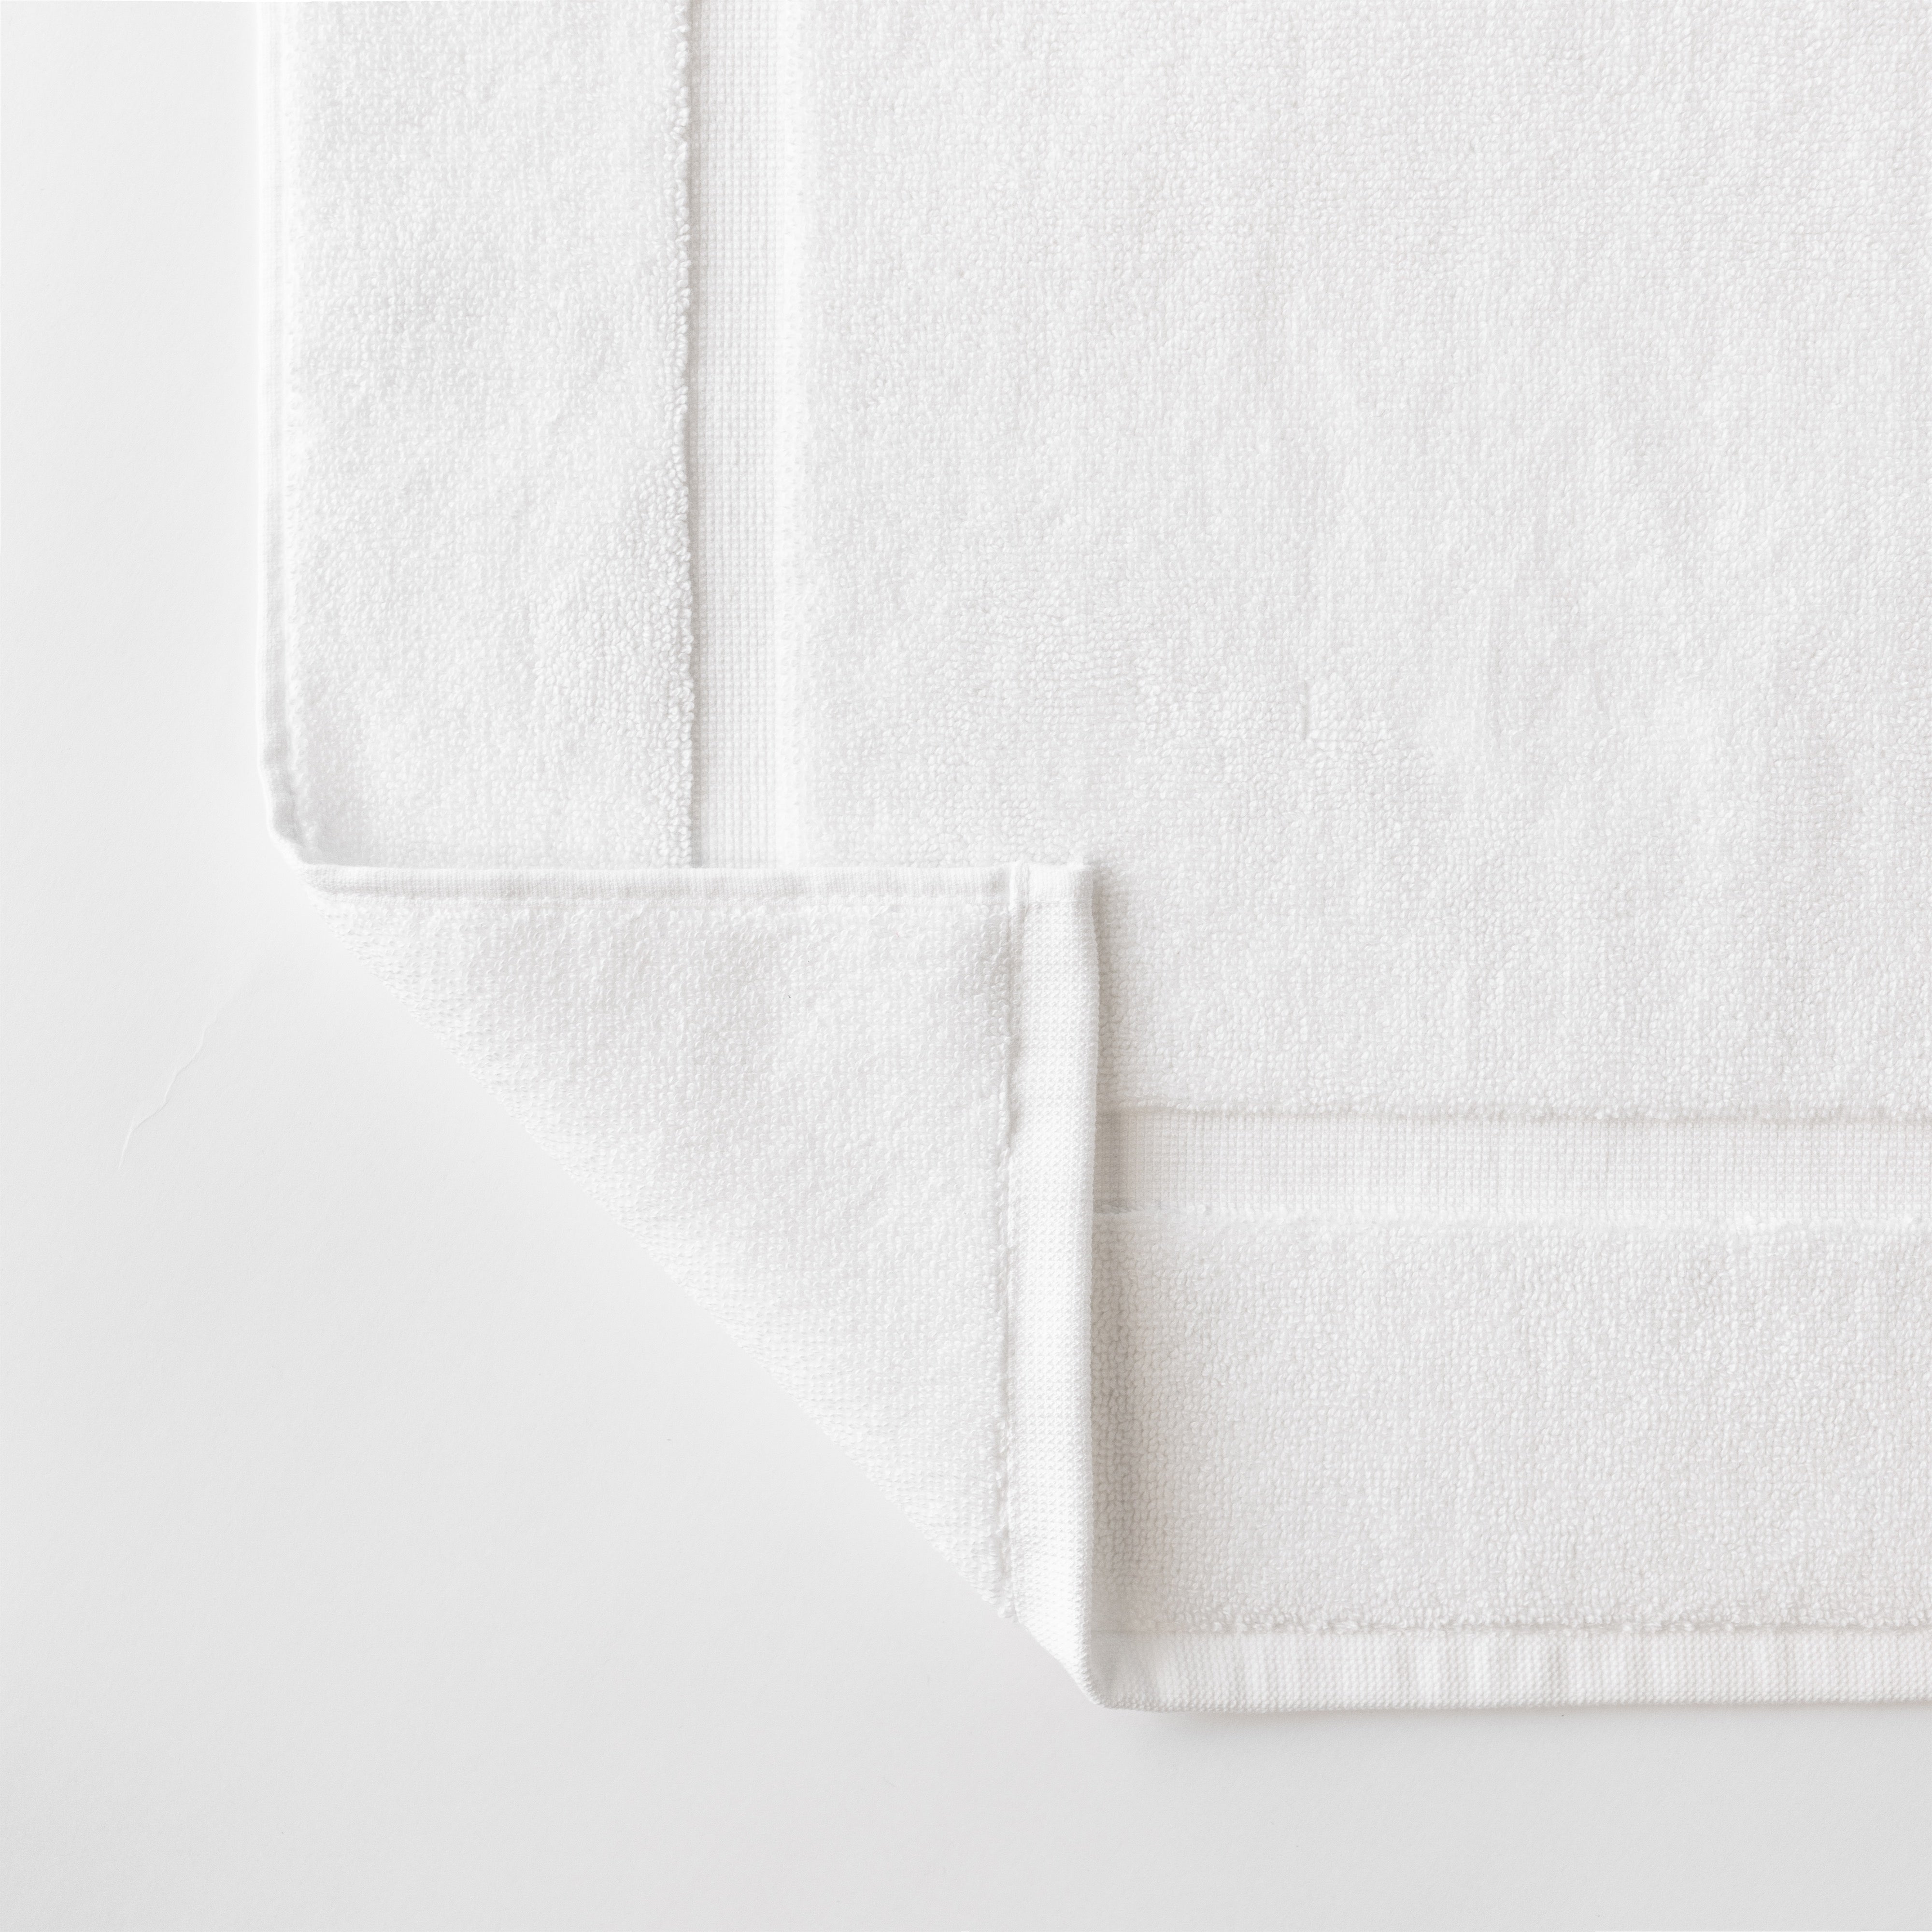 Close up shot of the Premium Plush Bath Mat. This shot shows only the mat so that the texture of the bath mat can be seen with more clarity|Color:White